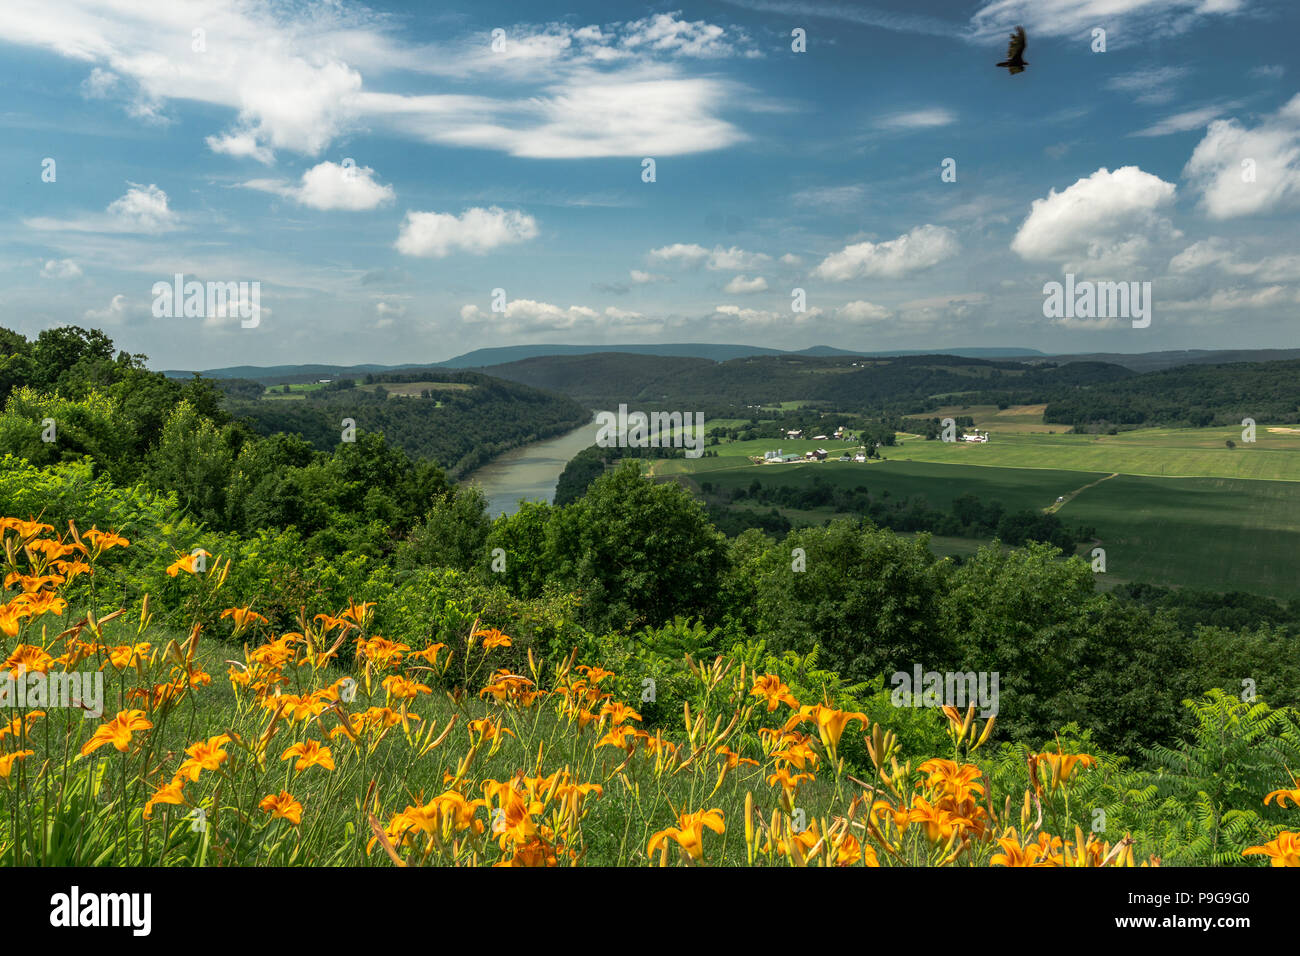 Marie Antoinette Lookout, French  Azilum, Susquehanna River, Bradford County, PA, USA Stock Photo